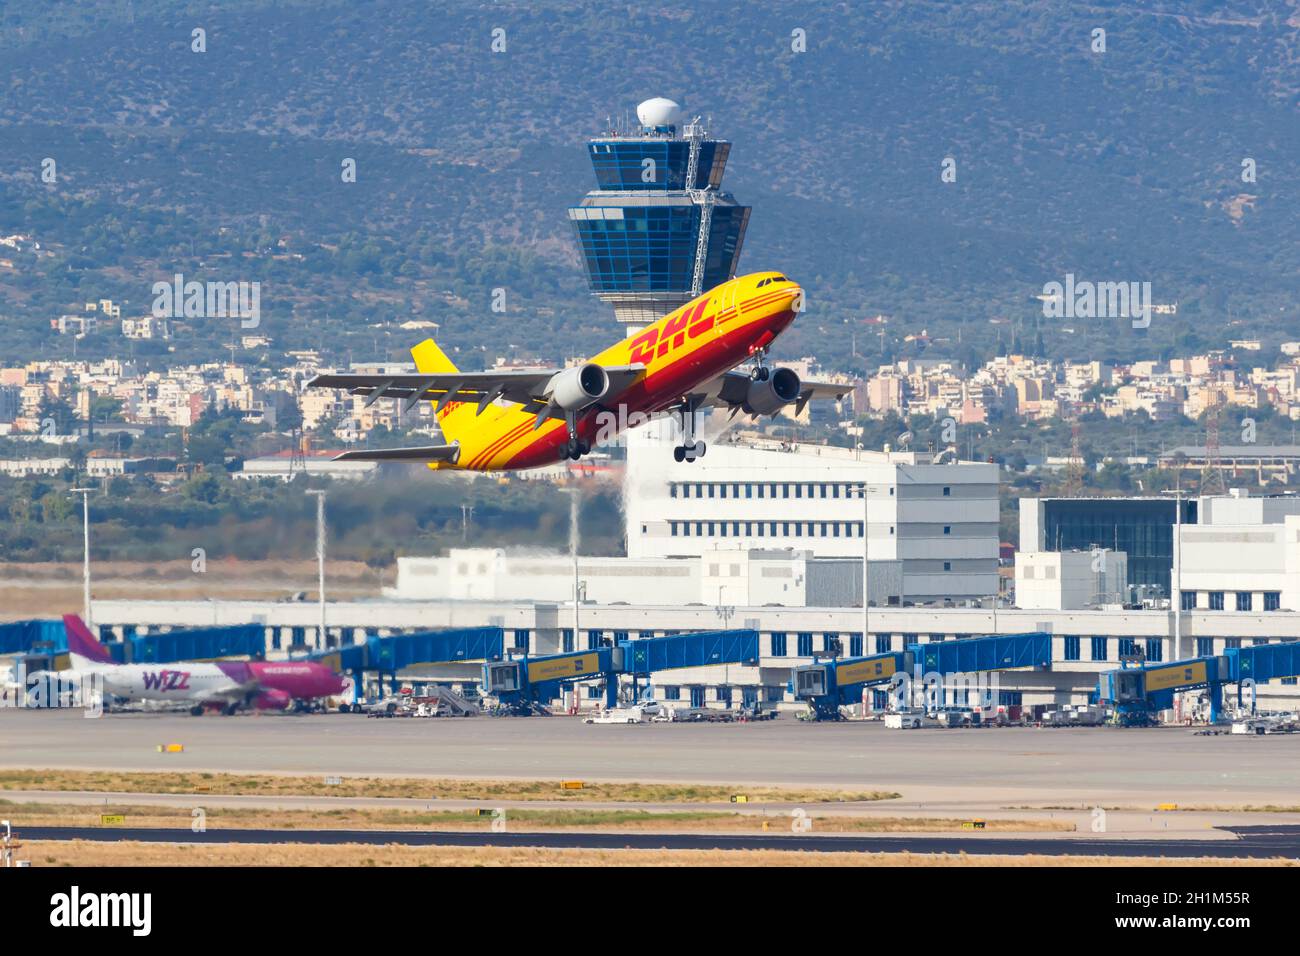 Athens, Greece - September 22, 2020: DHL European Air Transport Airbus A300-600F airplane Athens Airport in Greece. Airbus is a European aircraft manu Stock Photo